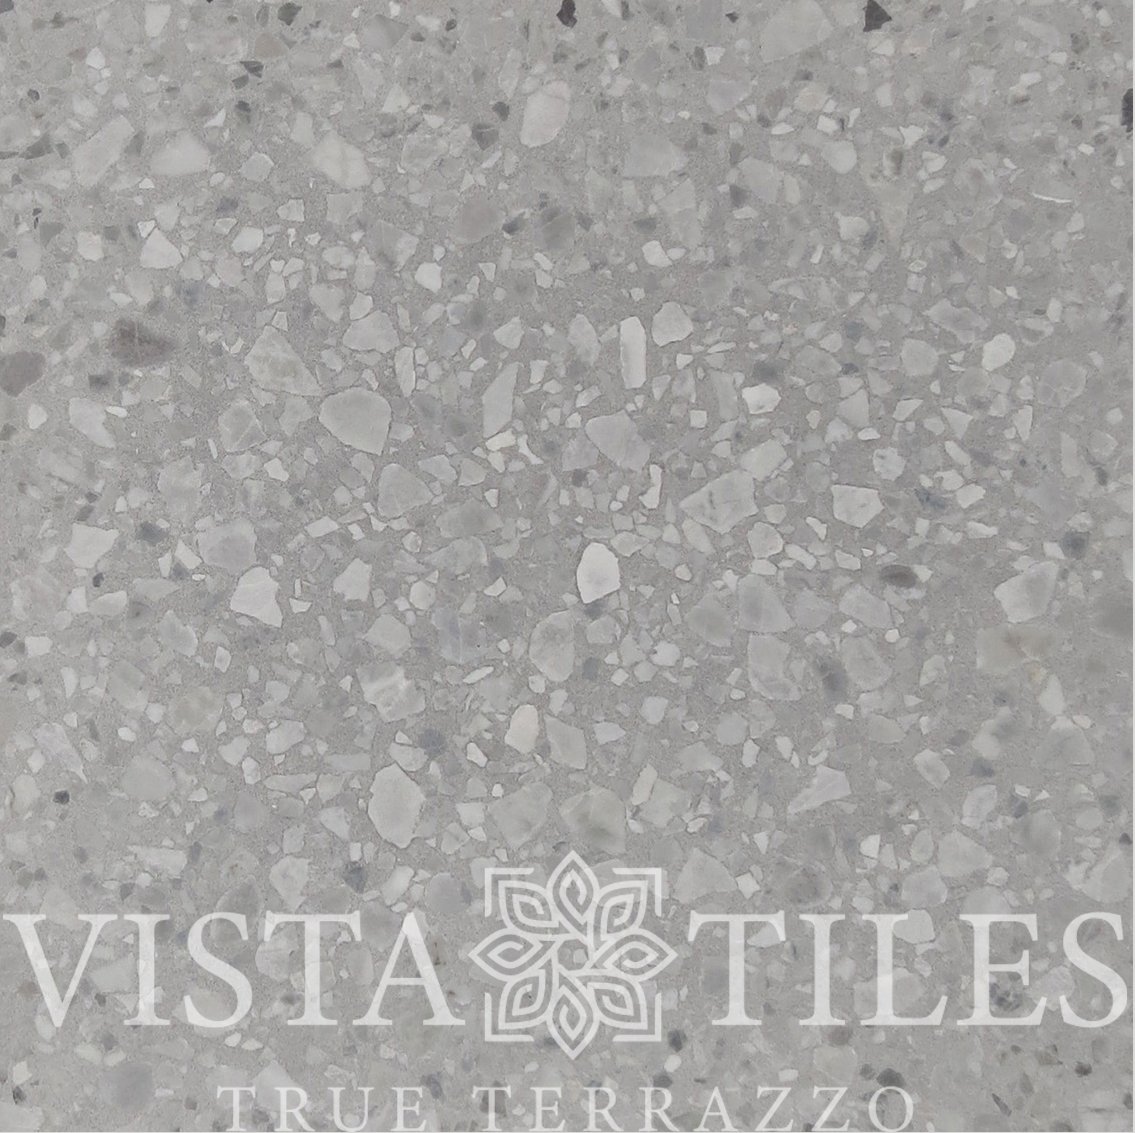 High Quality PRECAST Cement Base Terrazzo Floor / Wall Tile for Indoor and Outdoor Commercial and Residential Project 7x7 (SA-891)